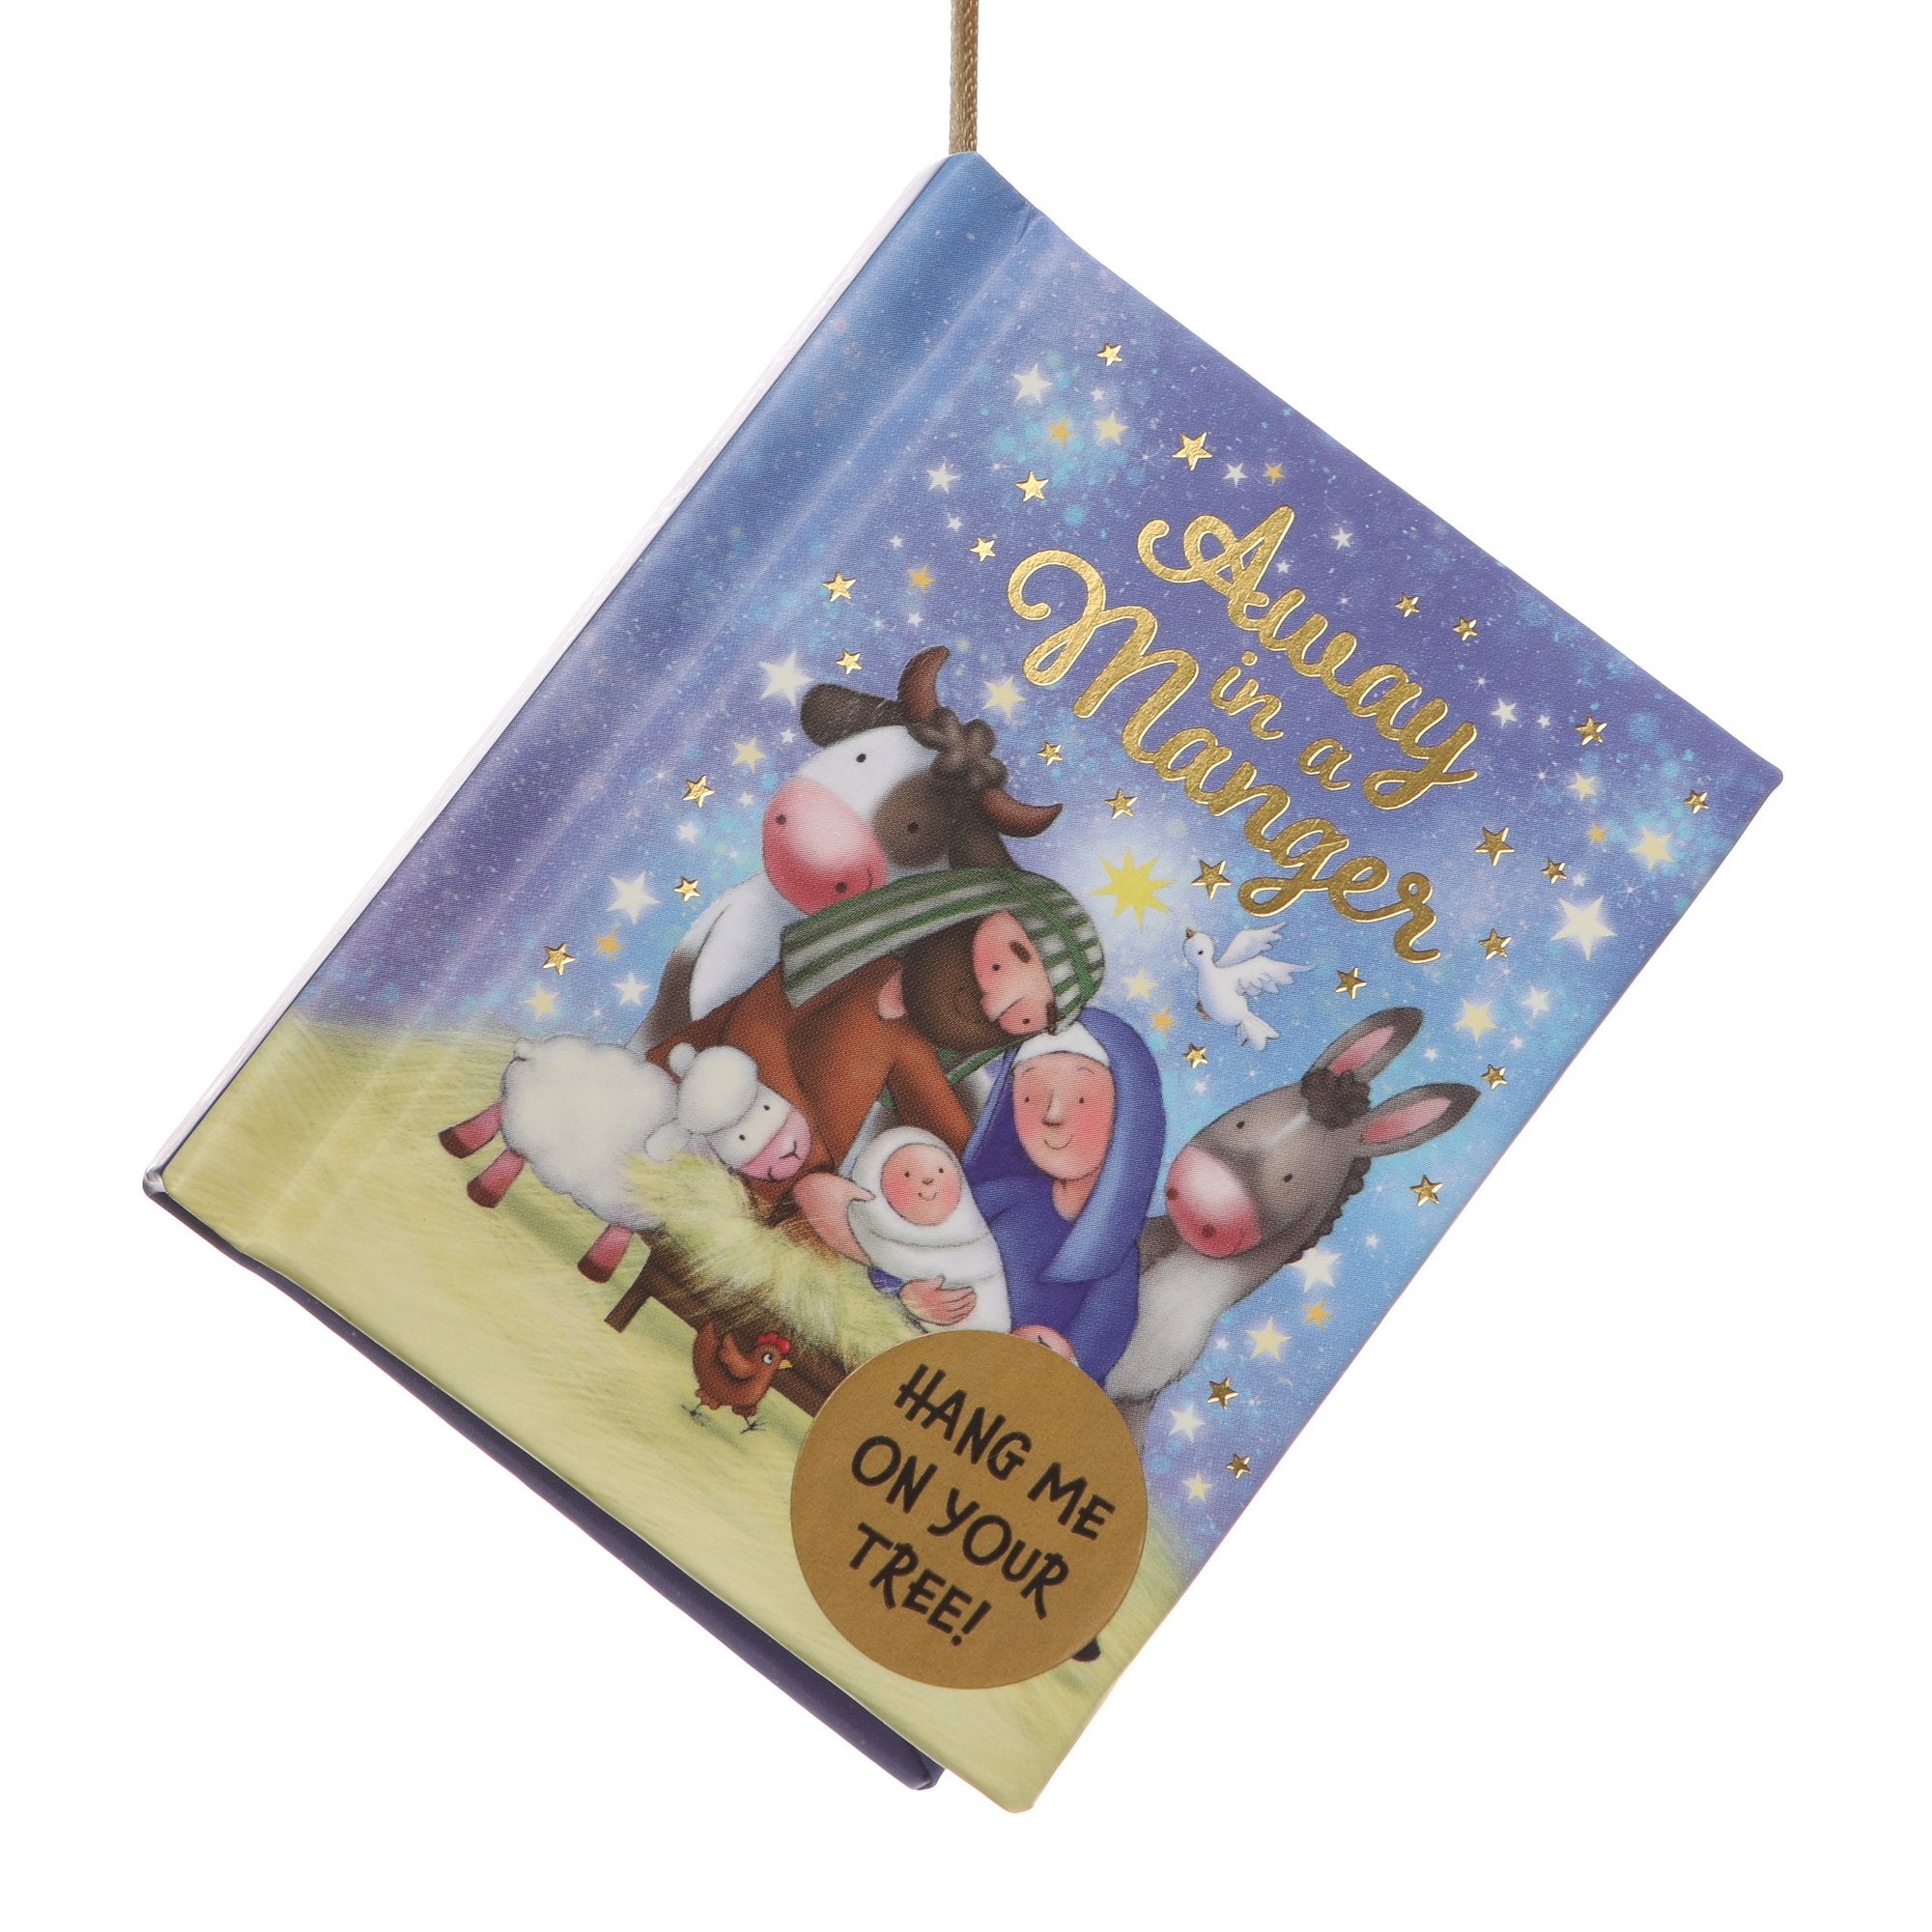 Christmas Giftbook - Away In A Manger